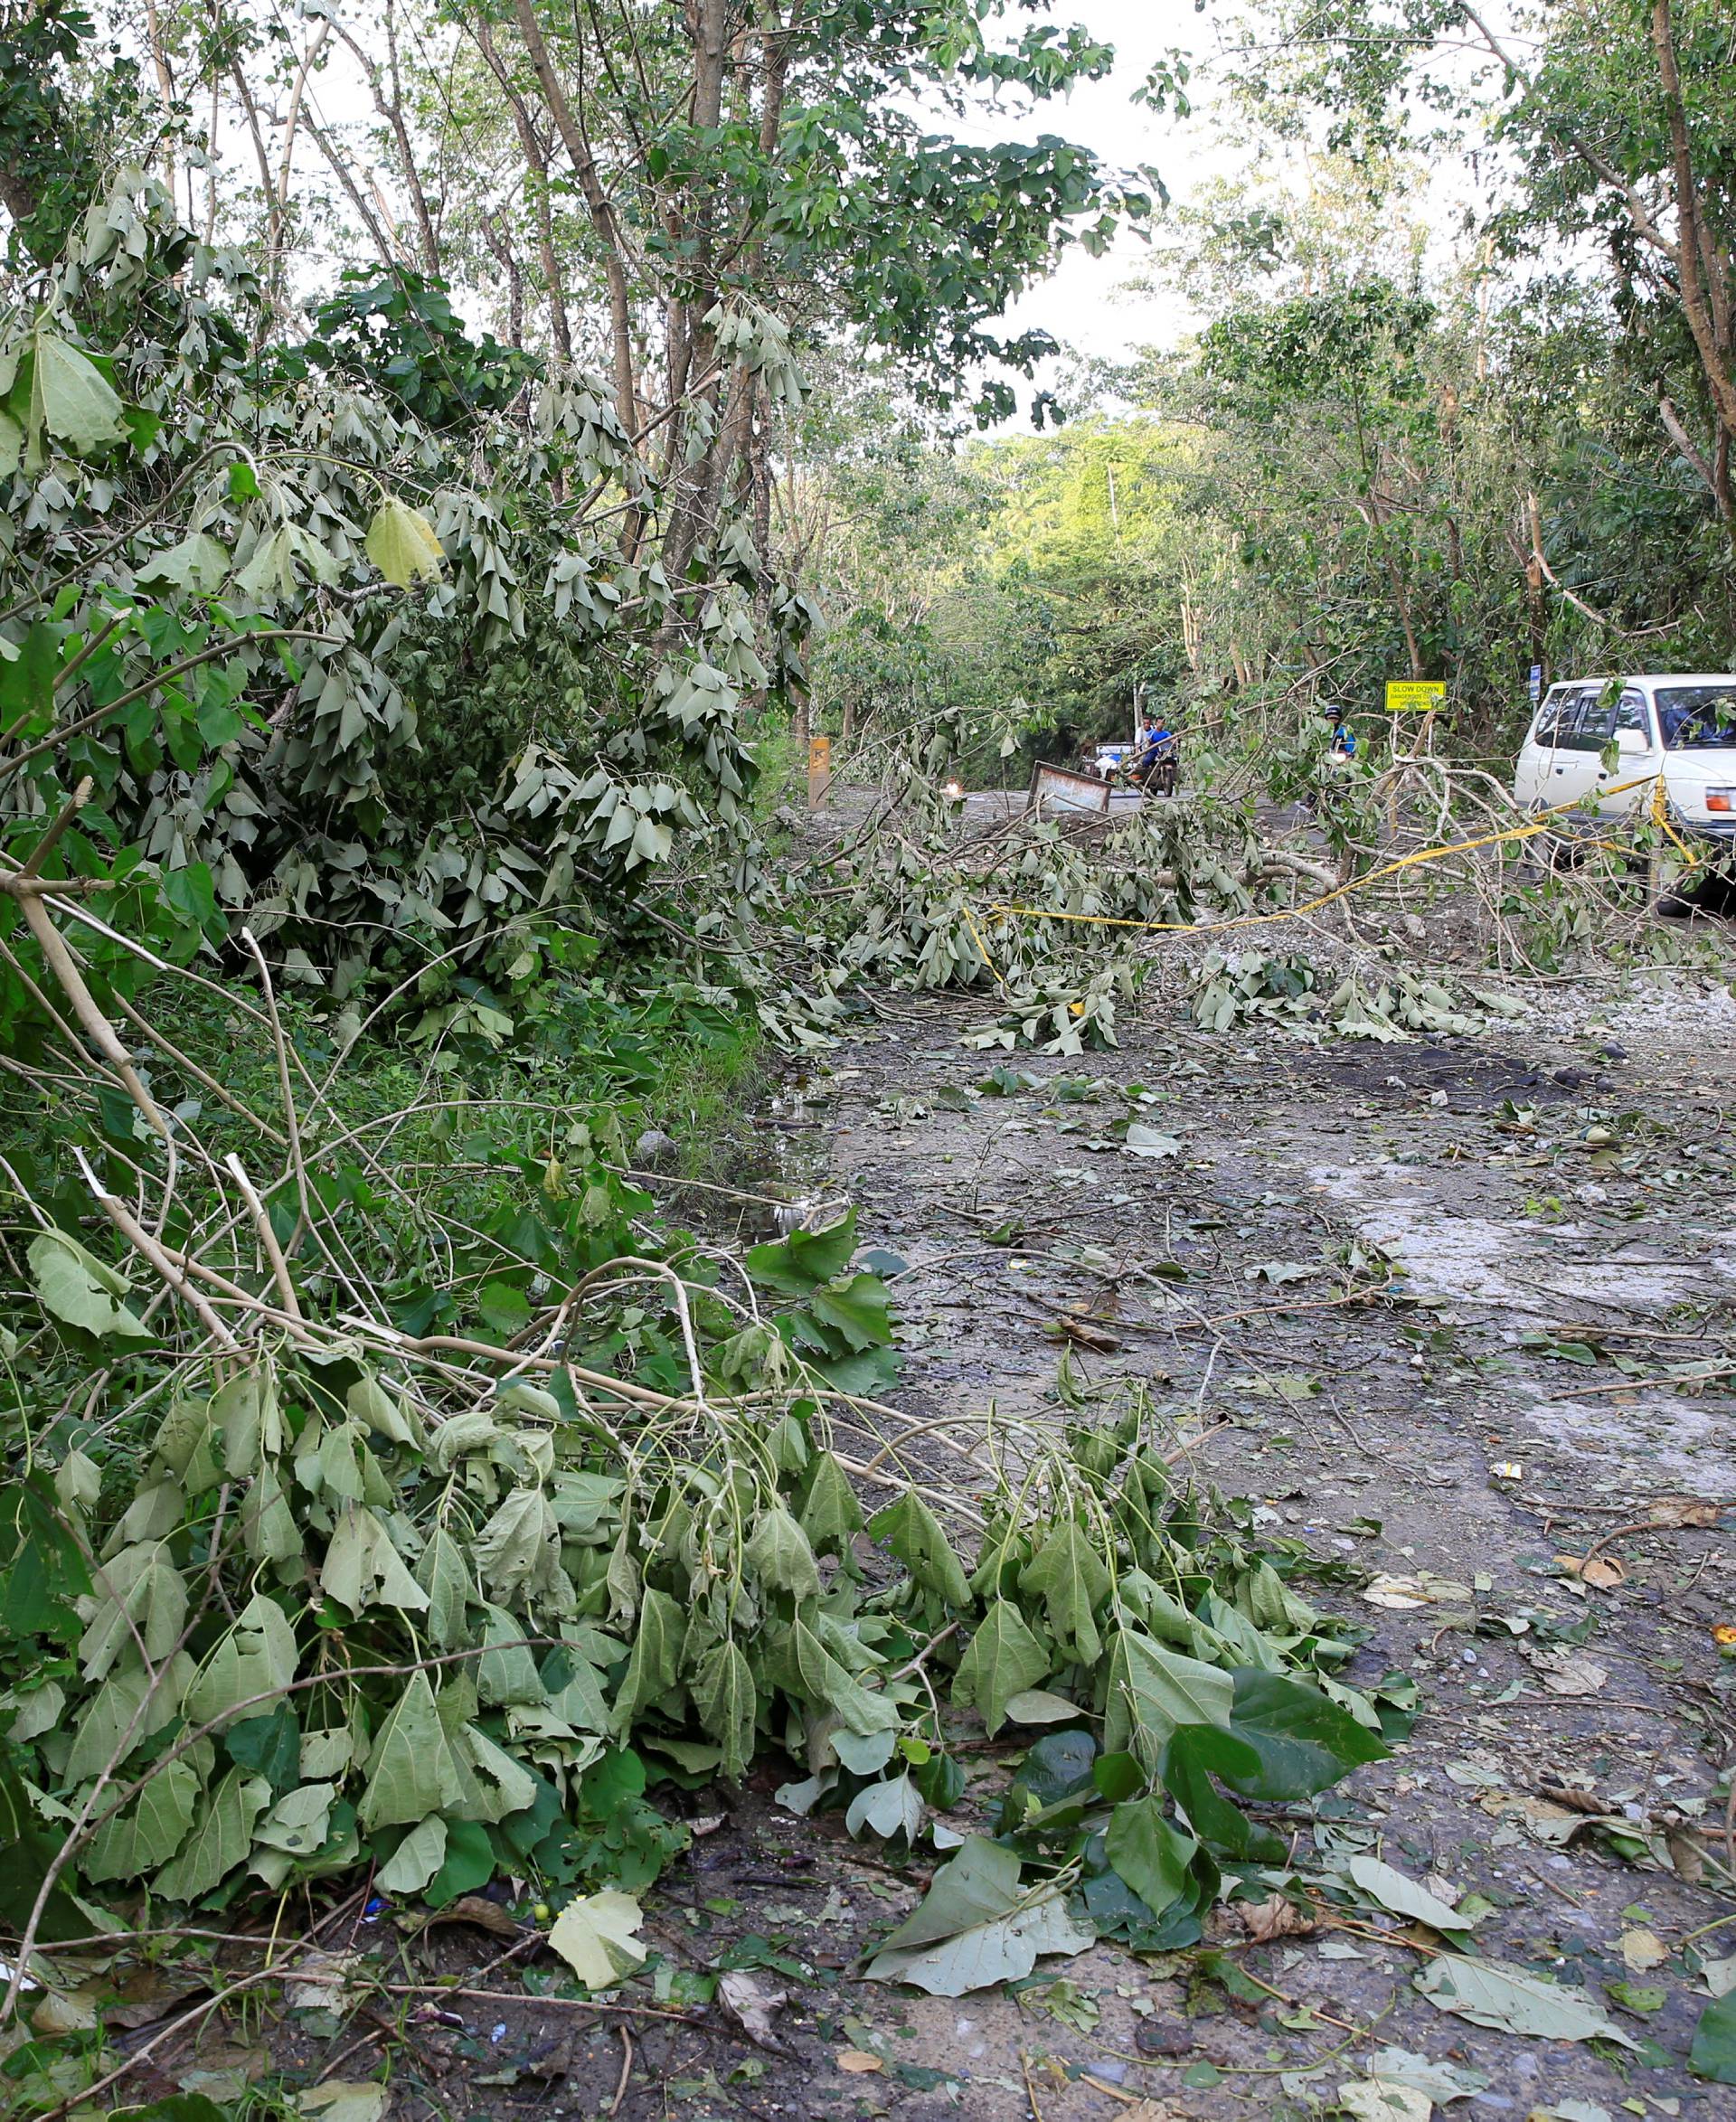 A vehicle drives pass trees and leaves uprooted by strong winds brought by Typhoon Nock-ten which cut through Camarines Sur, Bicol region